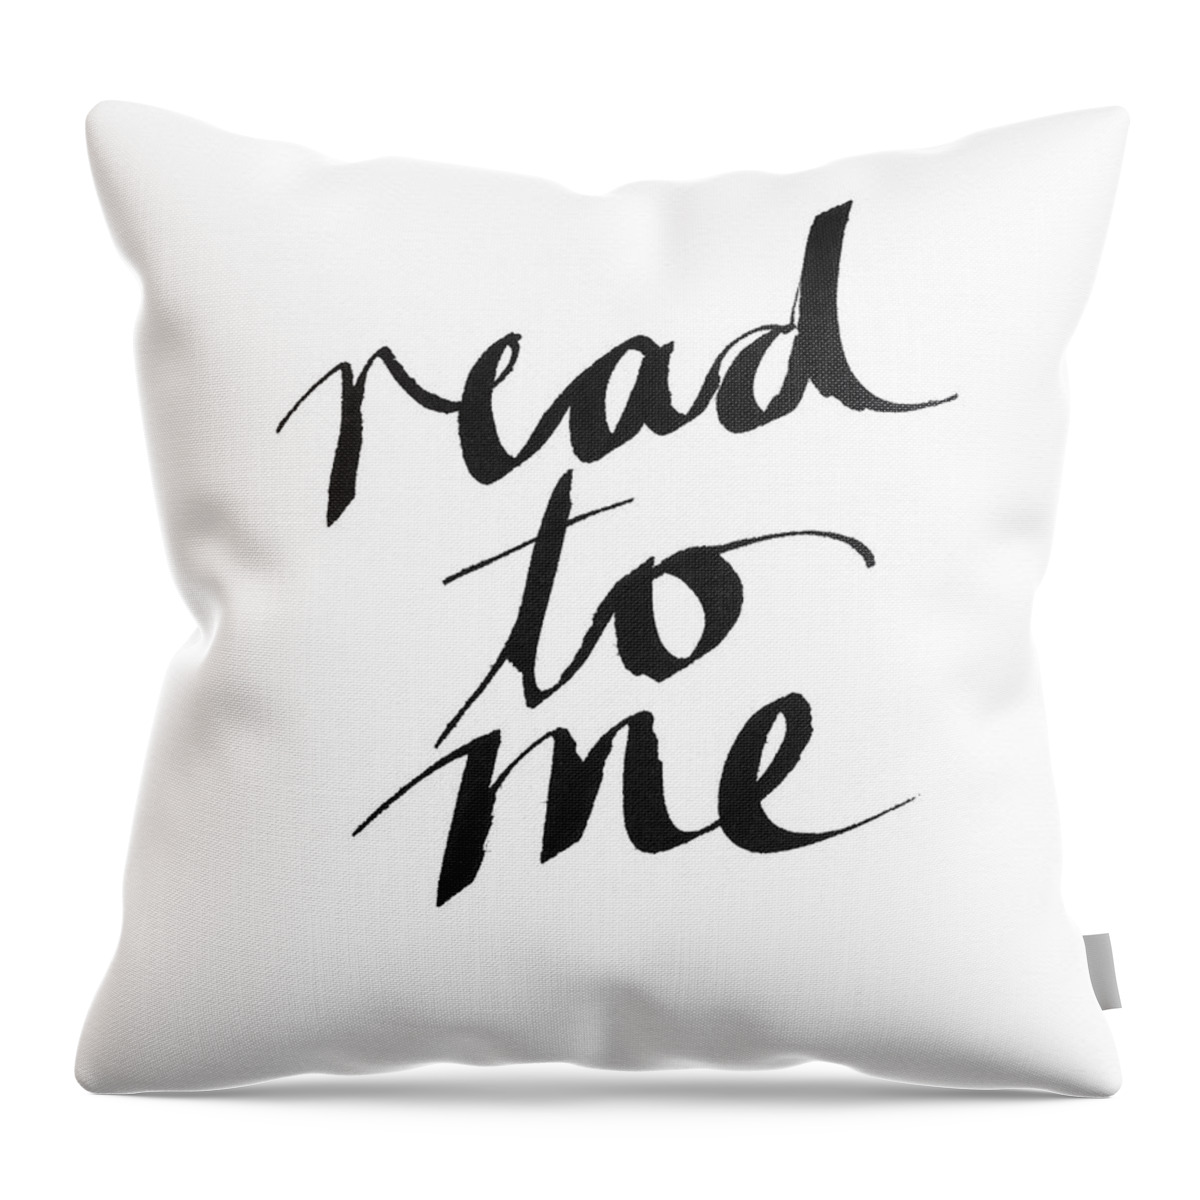 Reading Throw Pillow featuring the mixed media Read To Me- Art by Linda Woods by Linda Woods